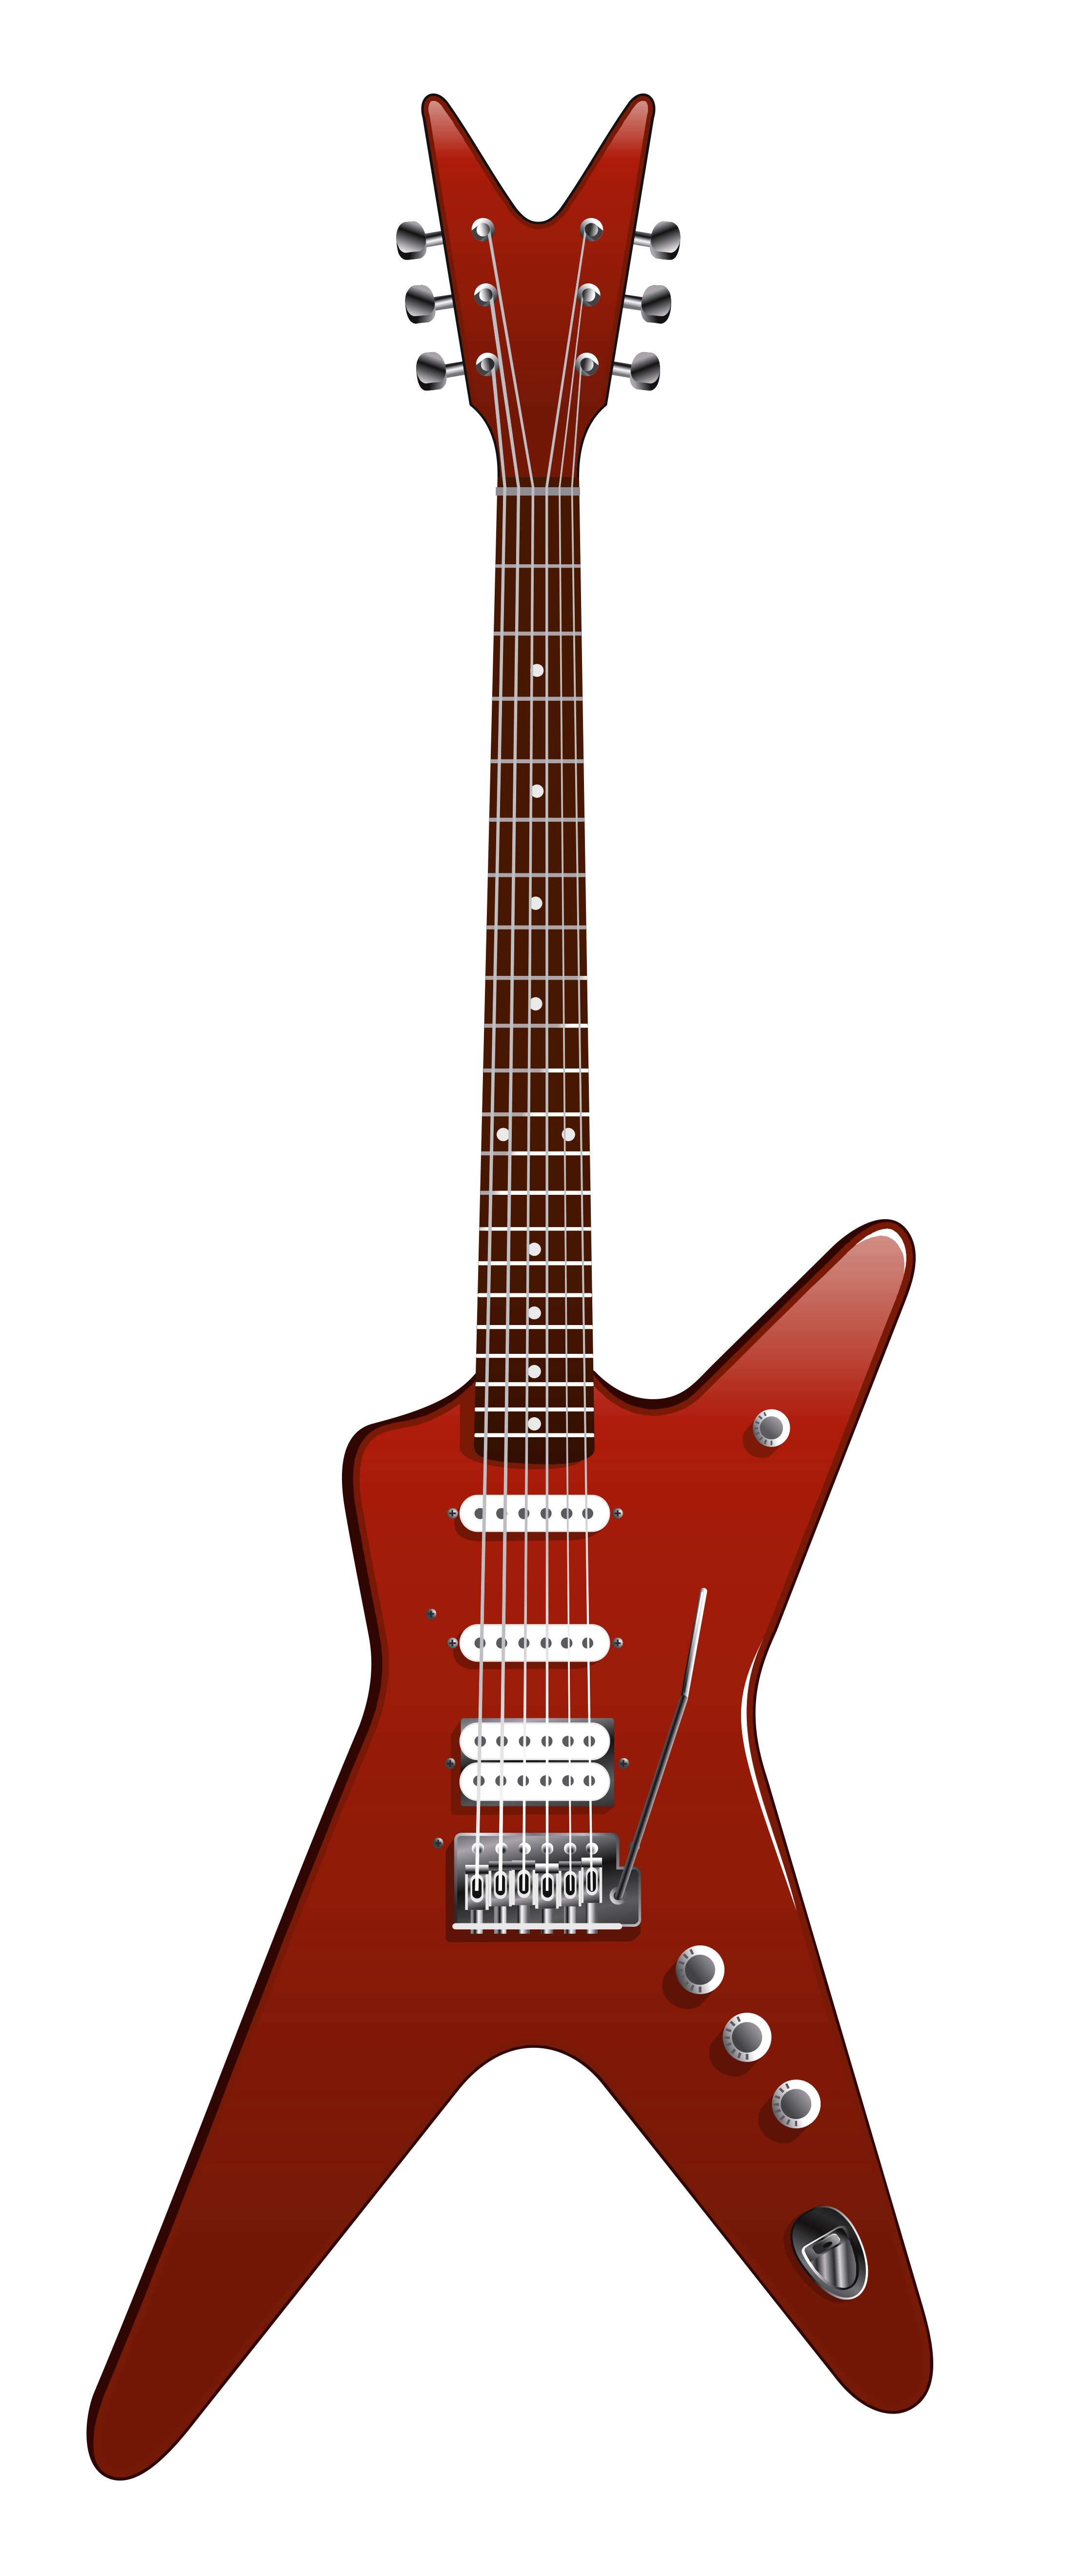 Transparent modern png gallery. Guitar clipart red guitar